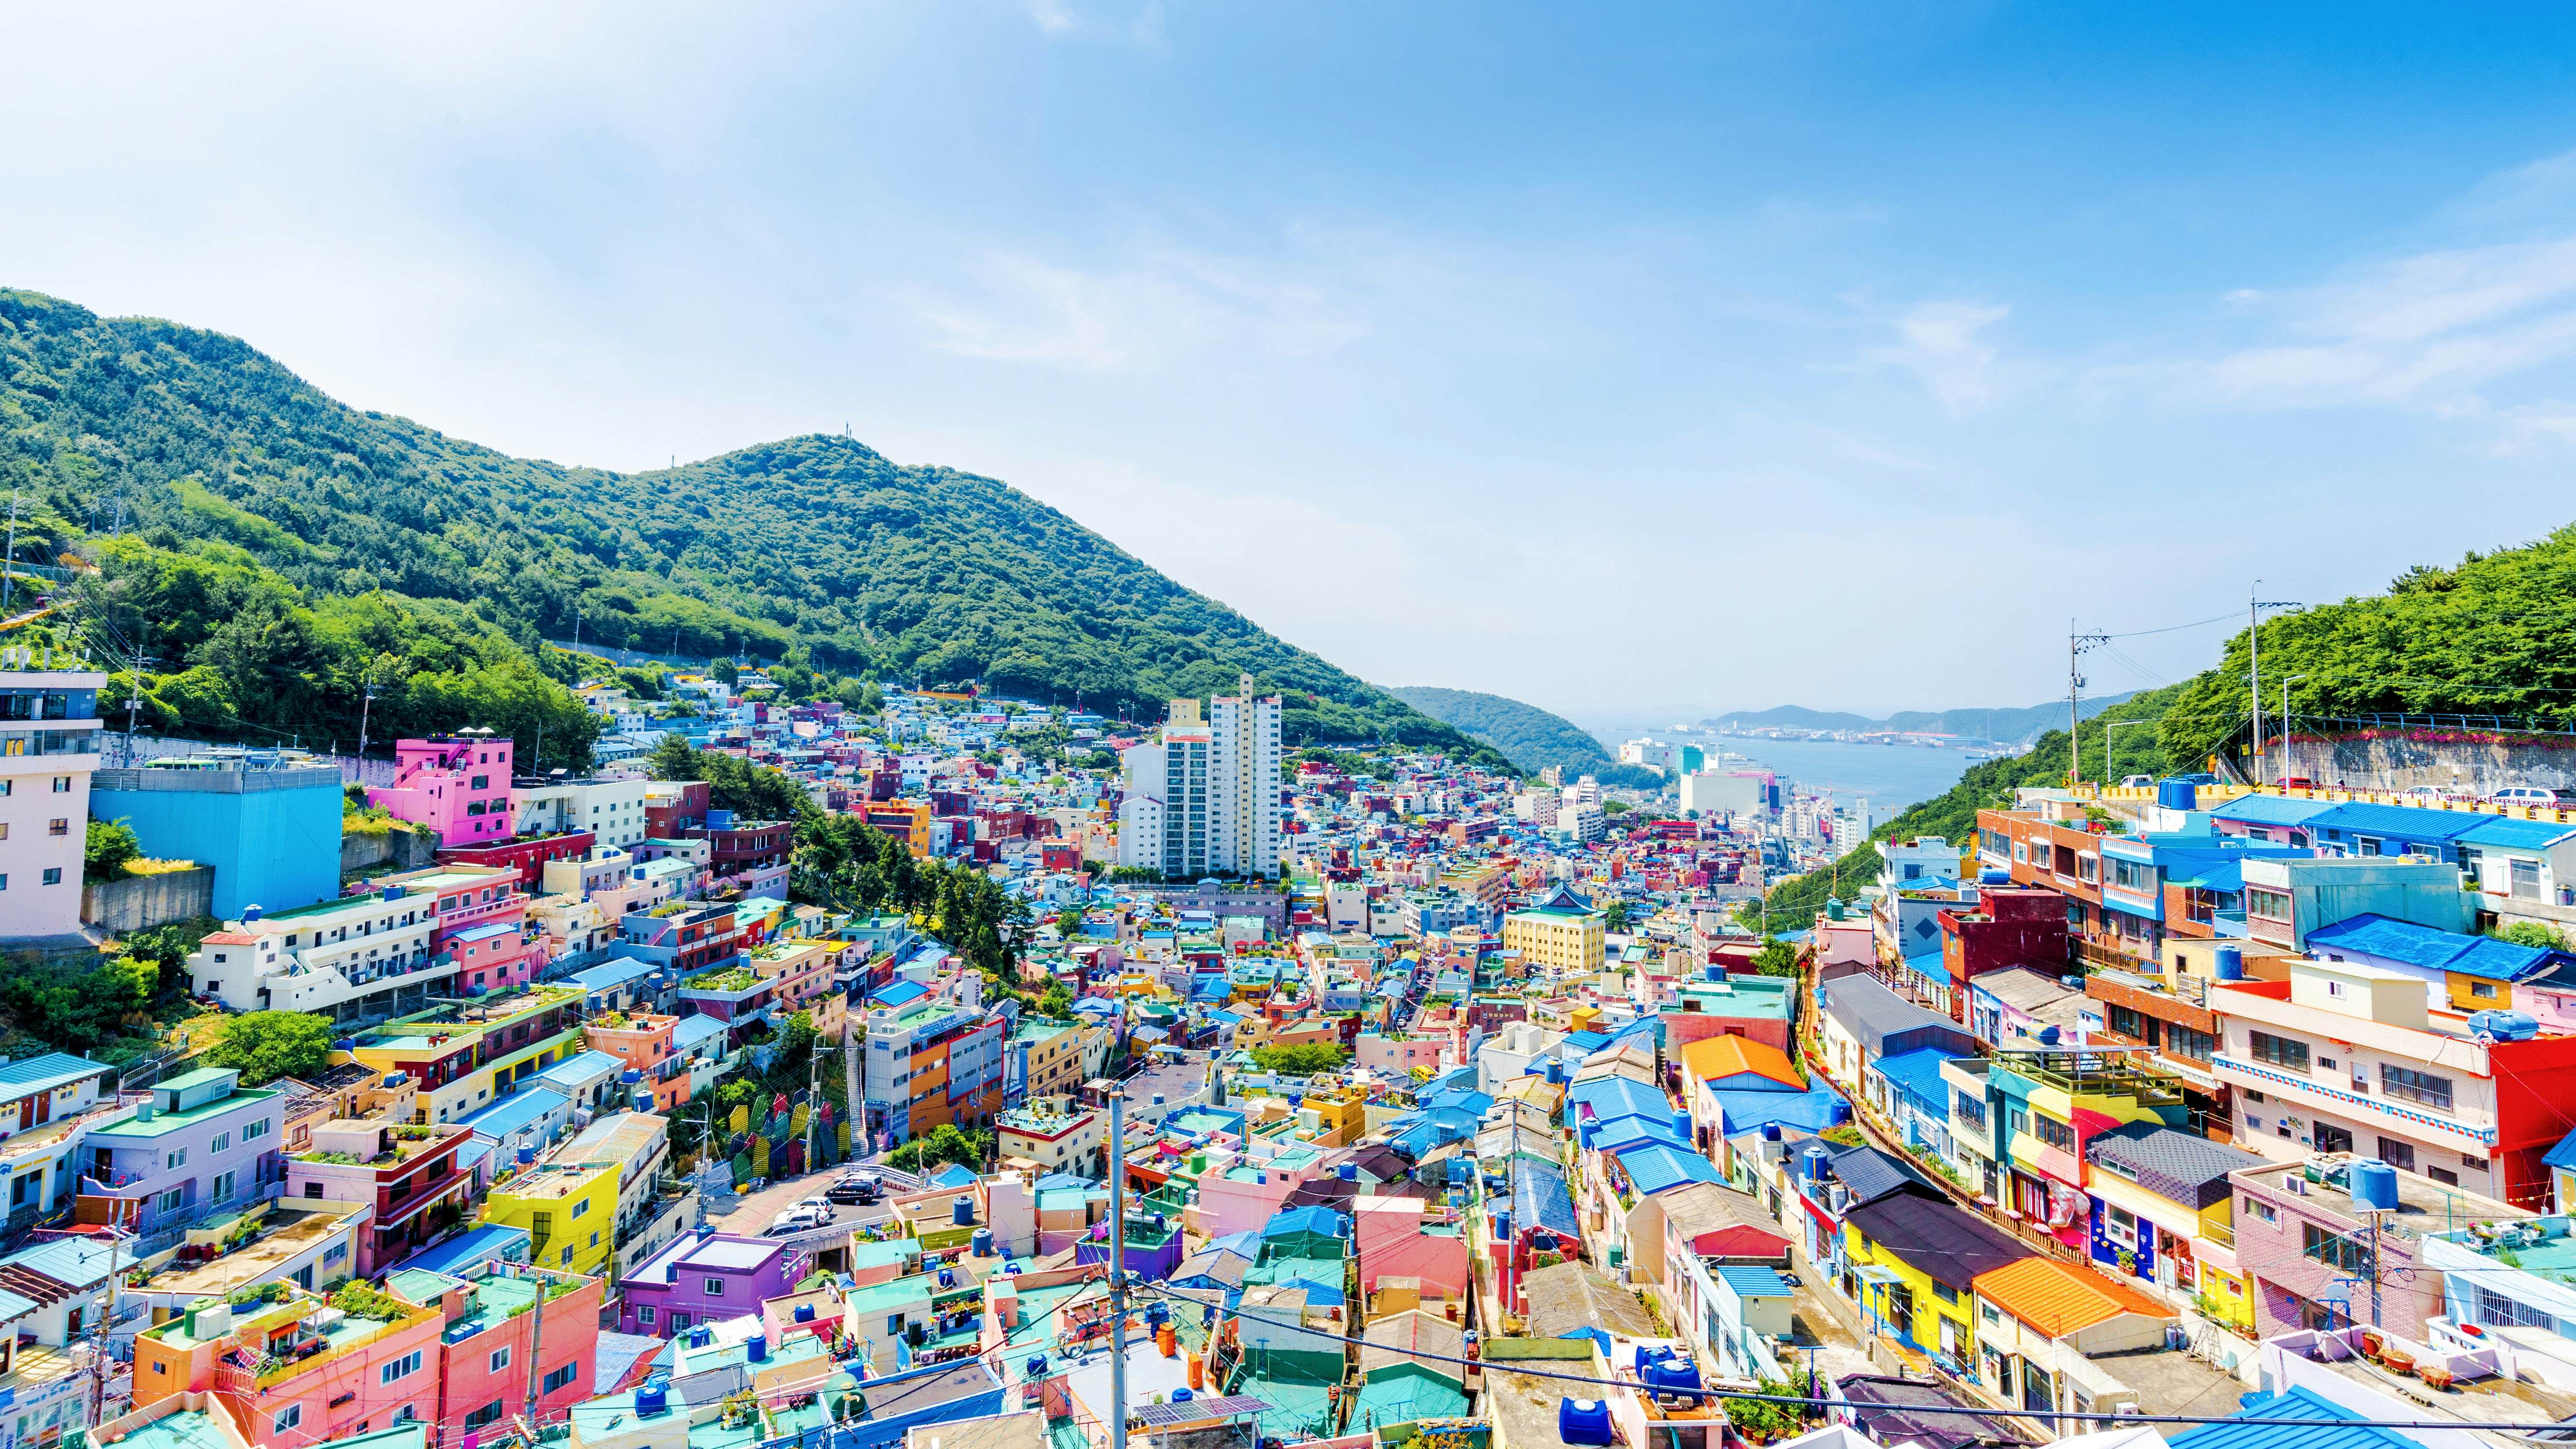 Gamcheon Culture Village Busan South Korea Attractions Lonely